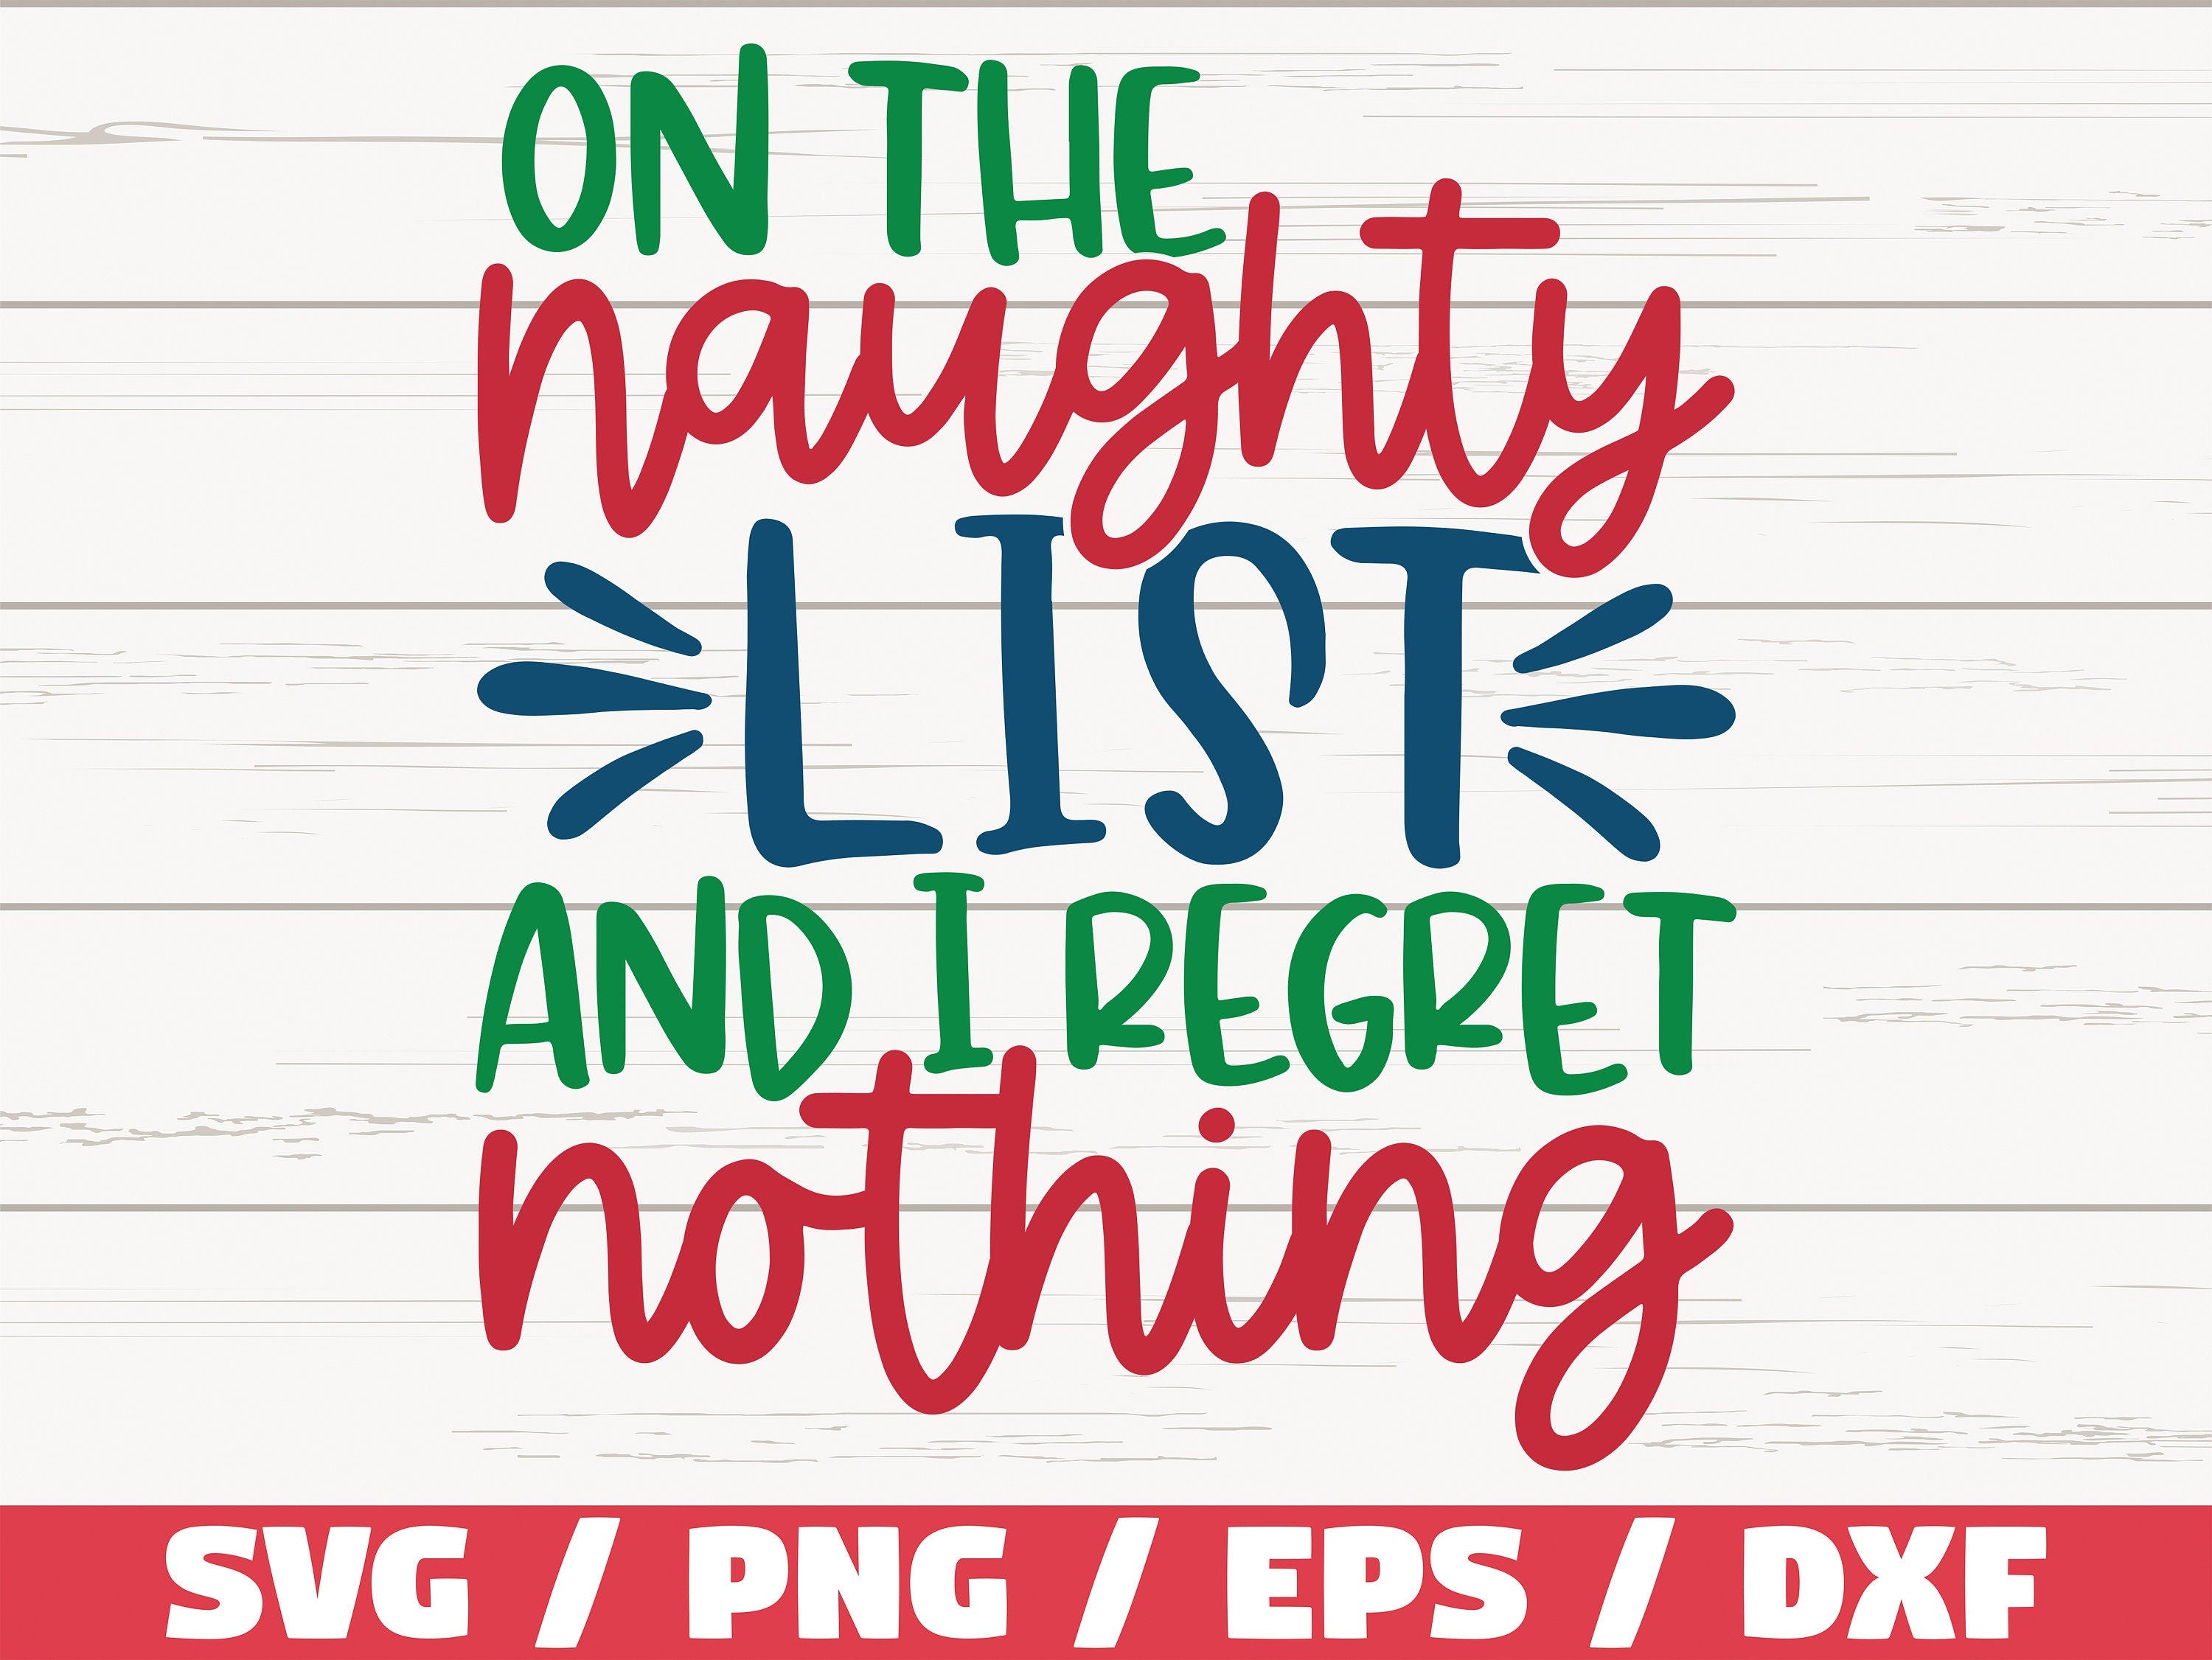 On The Naughty List And I Regret Nothing SVG / Christmas SVG / Cut File / Cricut / Commercial use / Silhouette / DXF file / Funny Christmas